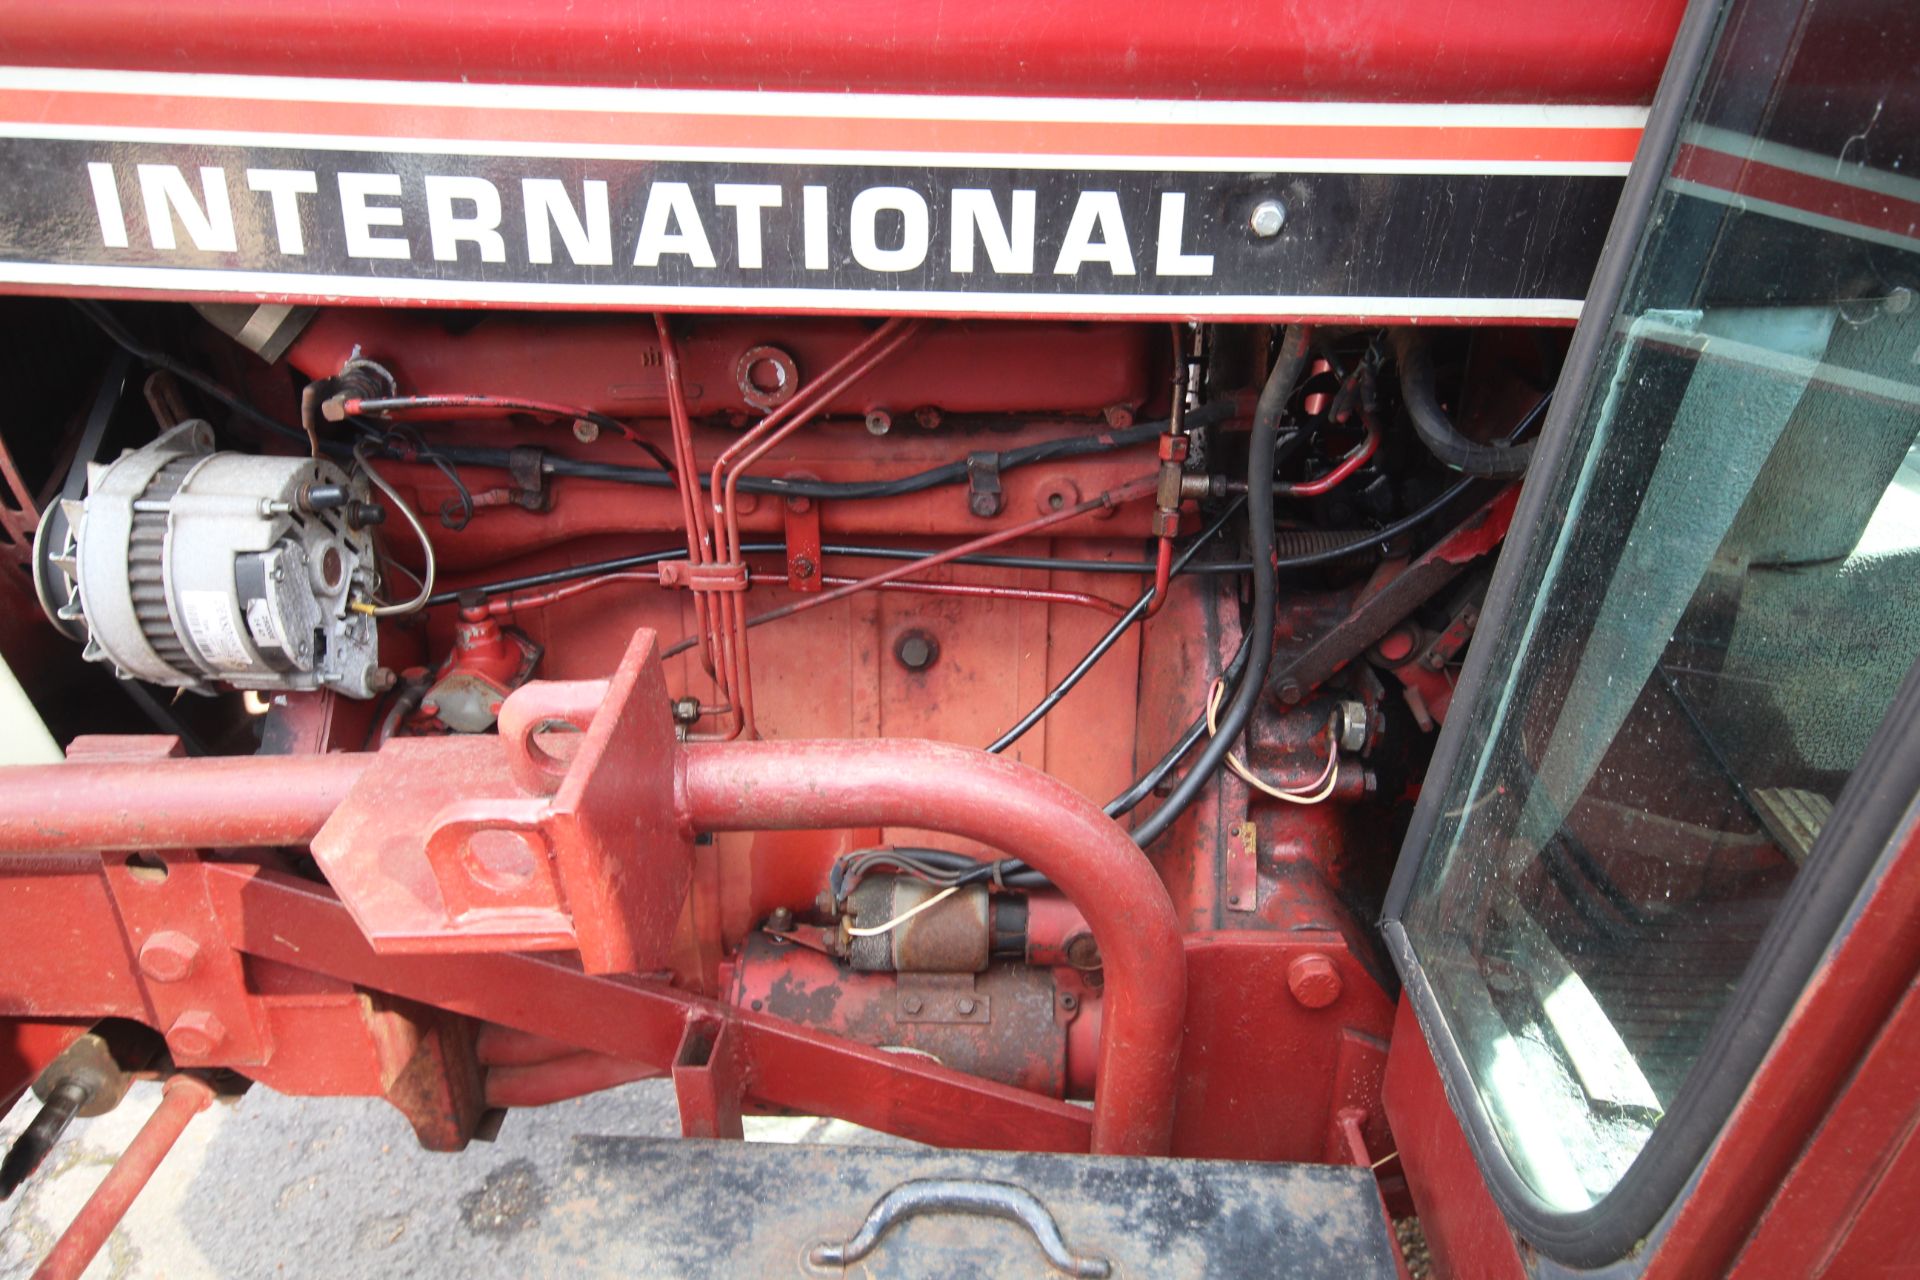 International Hydro 84 2WD tractor. Registration RGV 594W. Date of first registration 19/03/1981. - Image 40 of 62